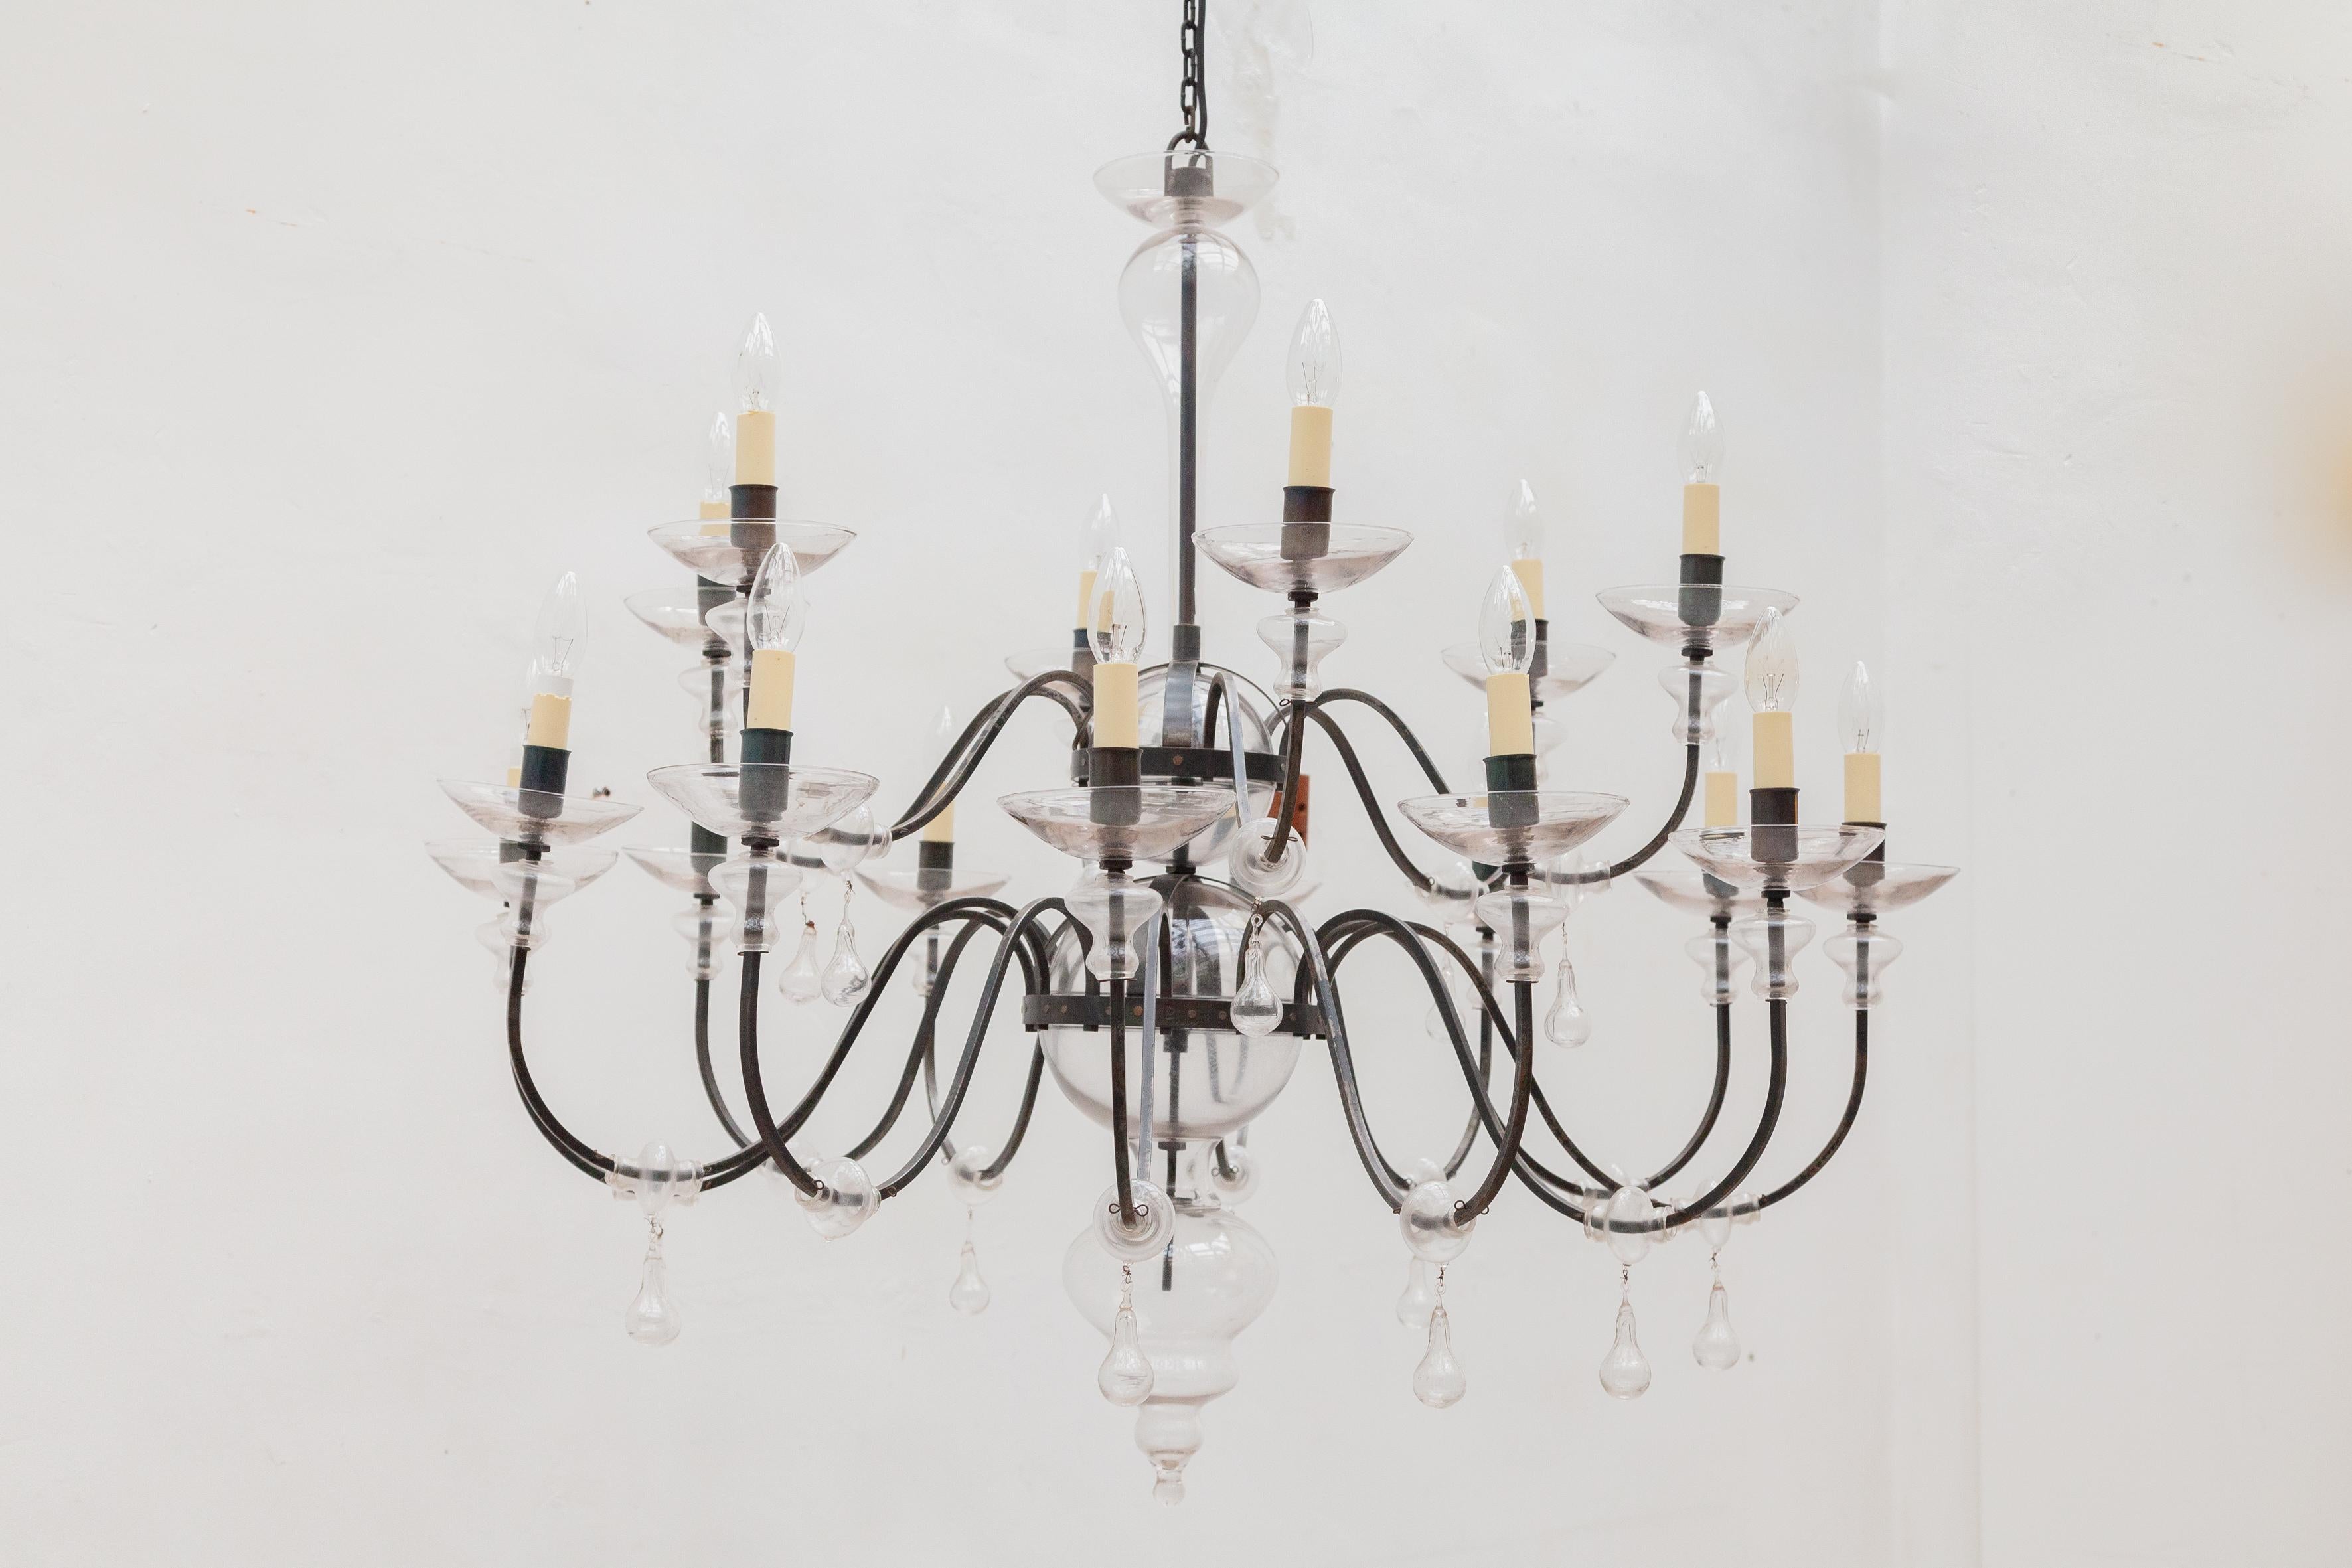 A beautiful classic chandelier wit mouth blown glass parts and wrought iron frame stamped by the artist Gunther Lambert circa 1980s is in very good vintage condition.